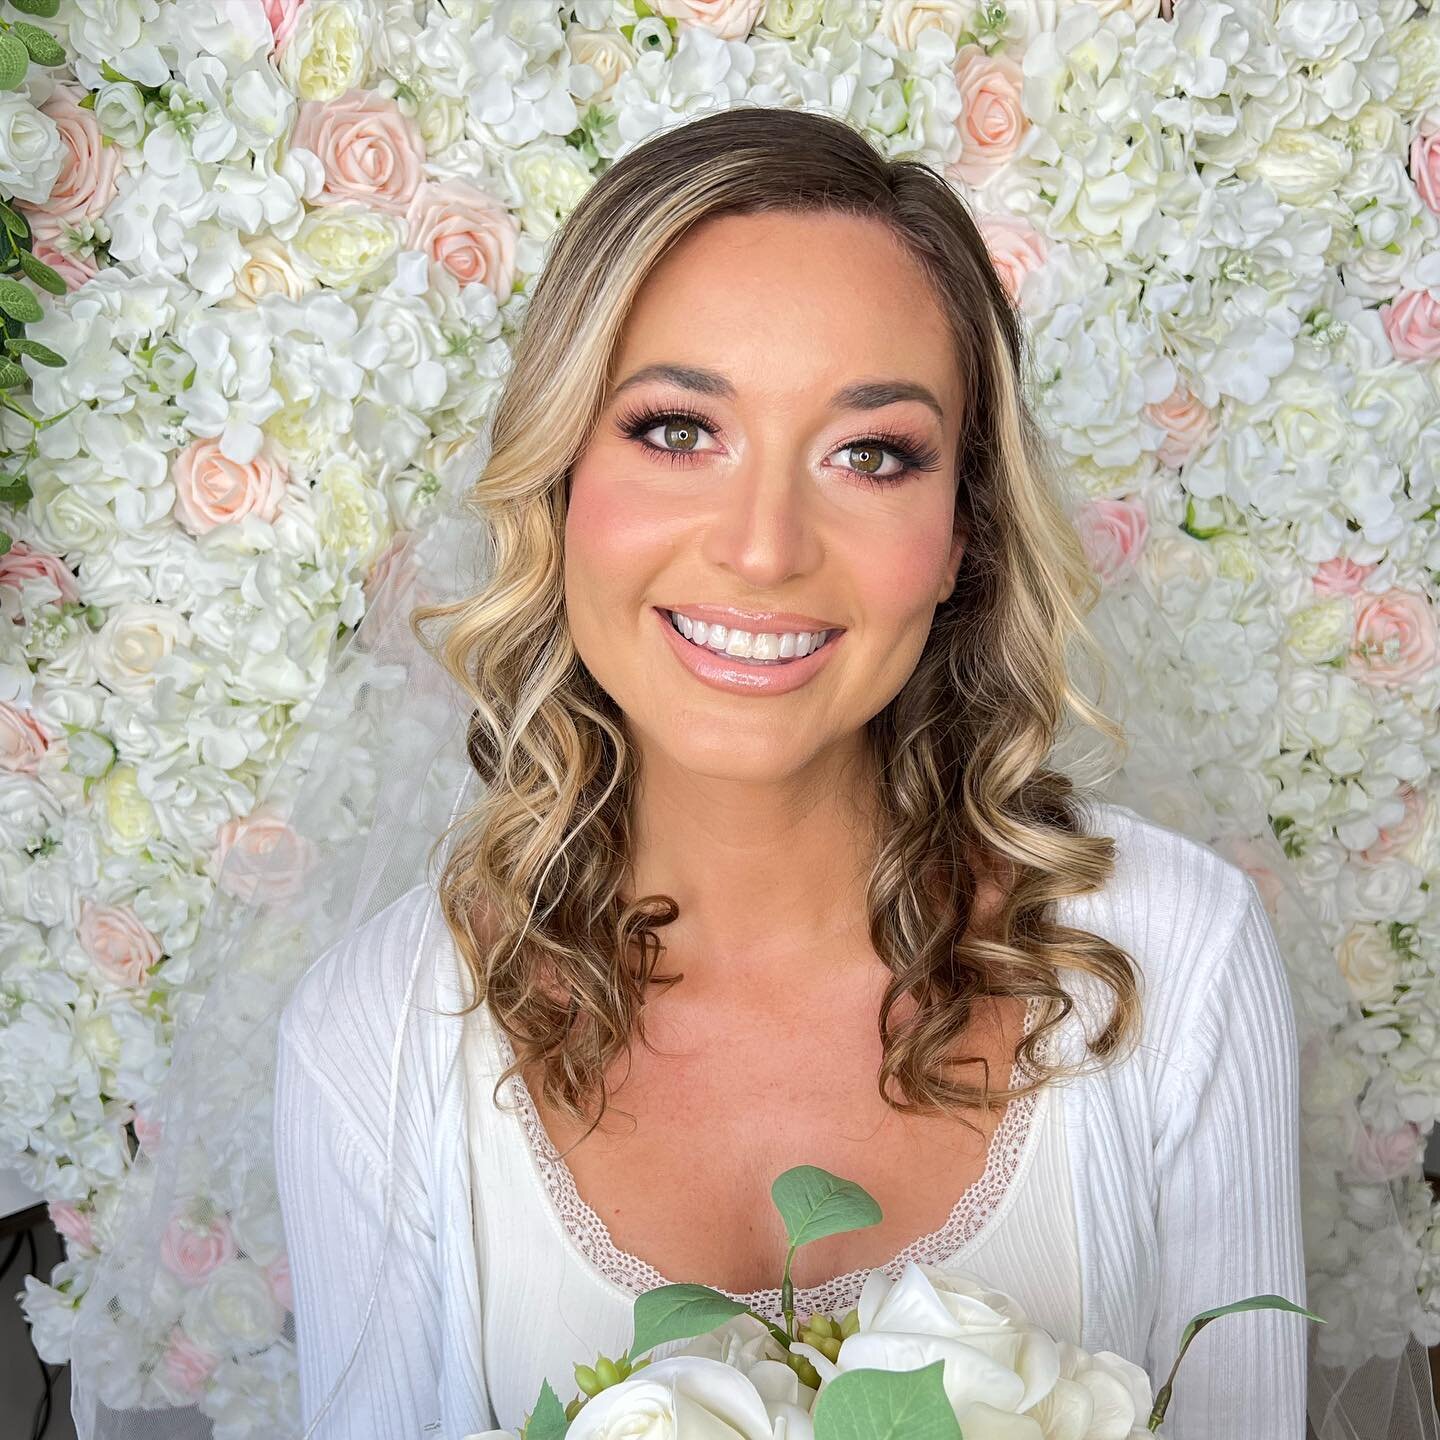 @kaitlynweathers You are a bombshell! 💣💣💣💣This was such an easy bridal trial because you are naturally beautiful and radiant! So excited to do this look for you on your wedding day! You deserve the best wedding ever! ❤️❤️❤️❤️
.
.
.
#purebeautybyd